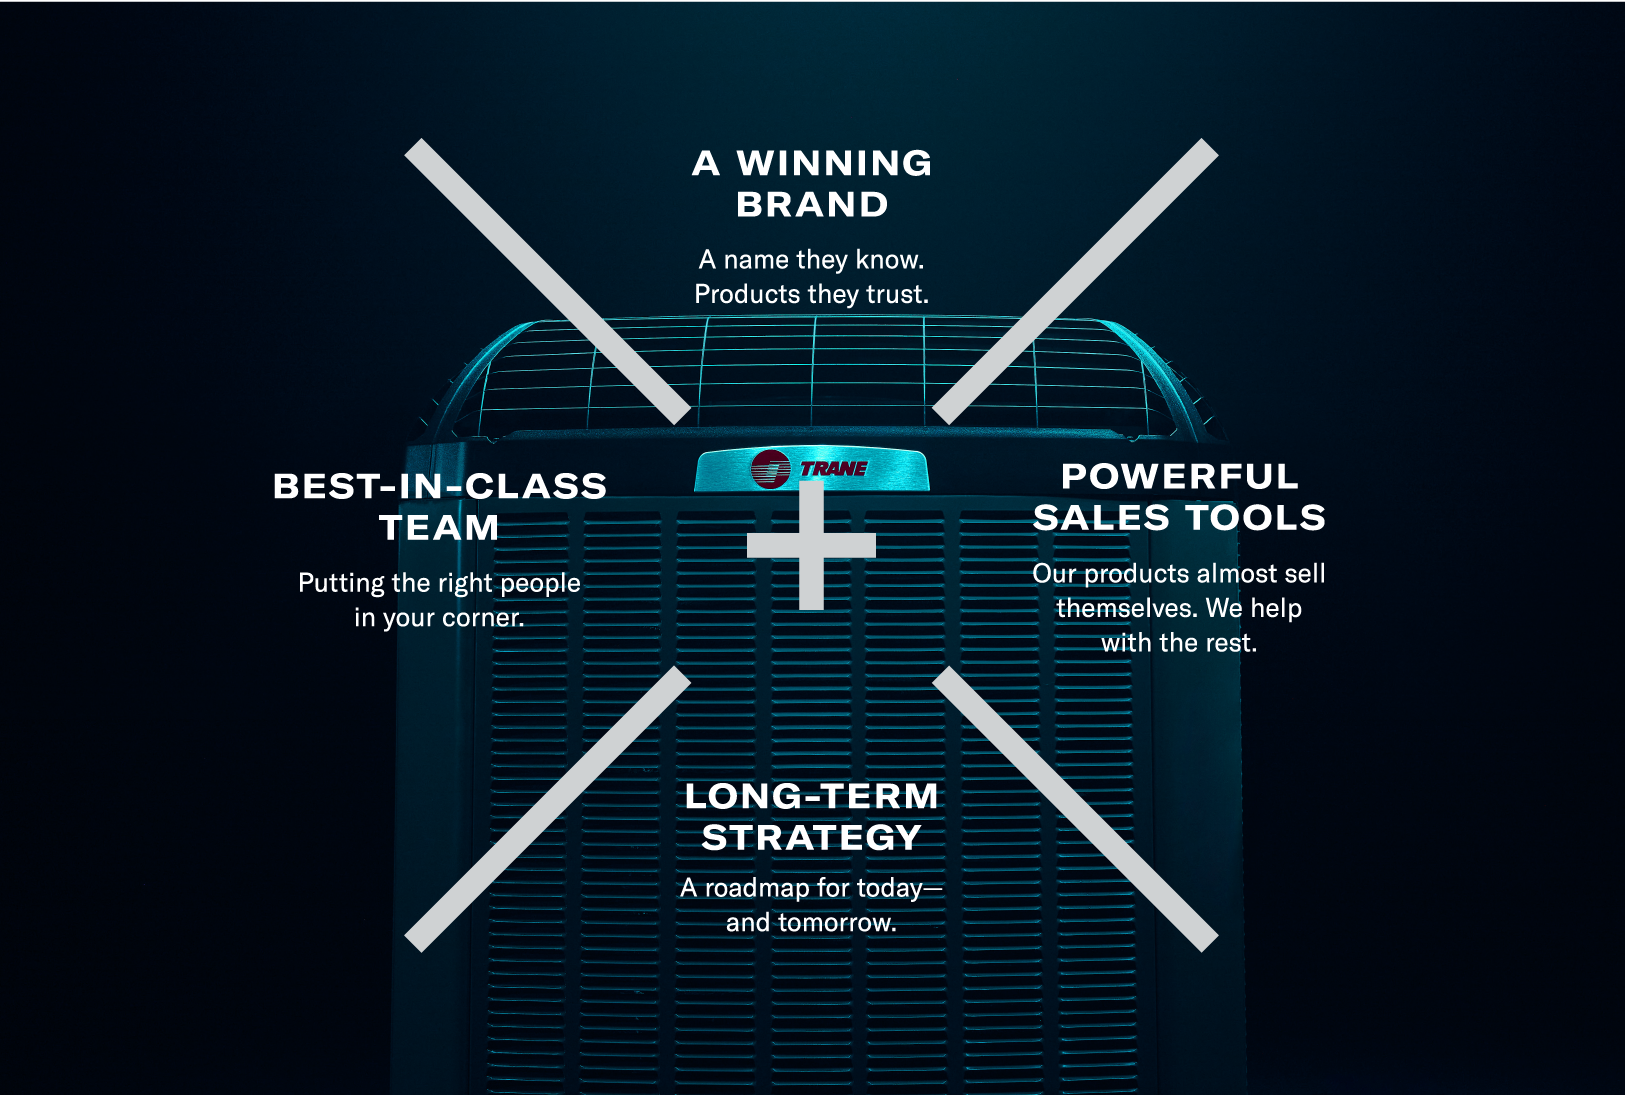 Quad box- a winning brand, best-in-class team, powerful sales tools, long-term strategy